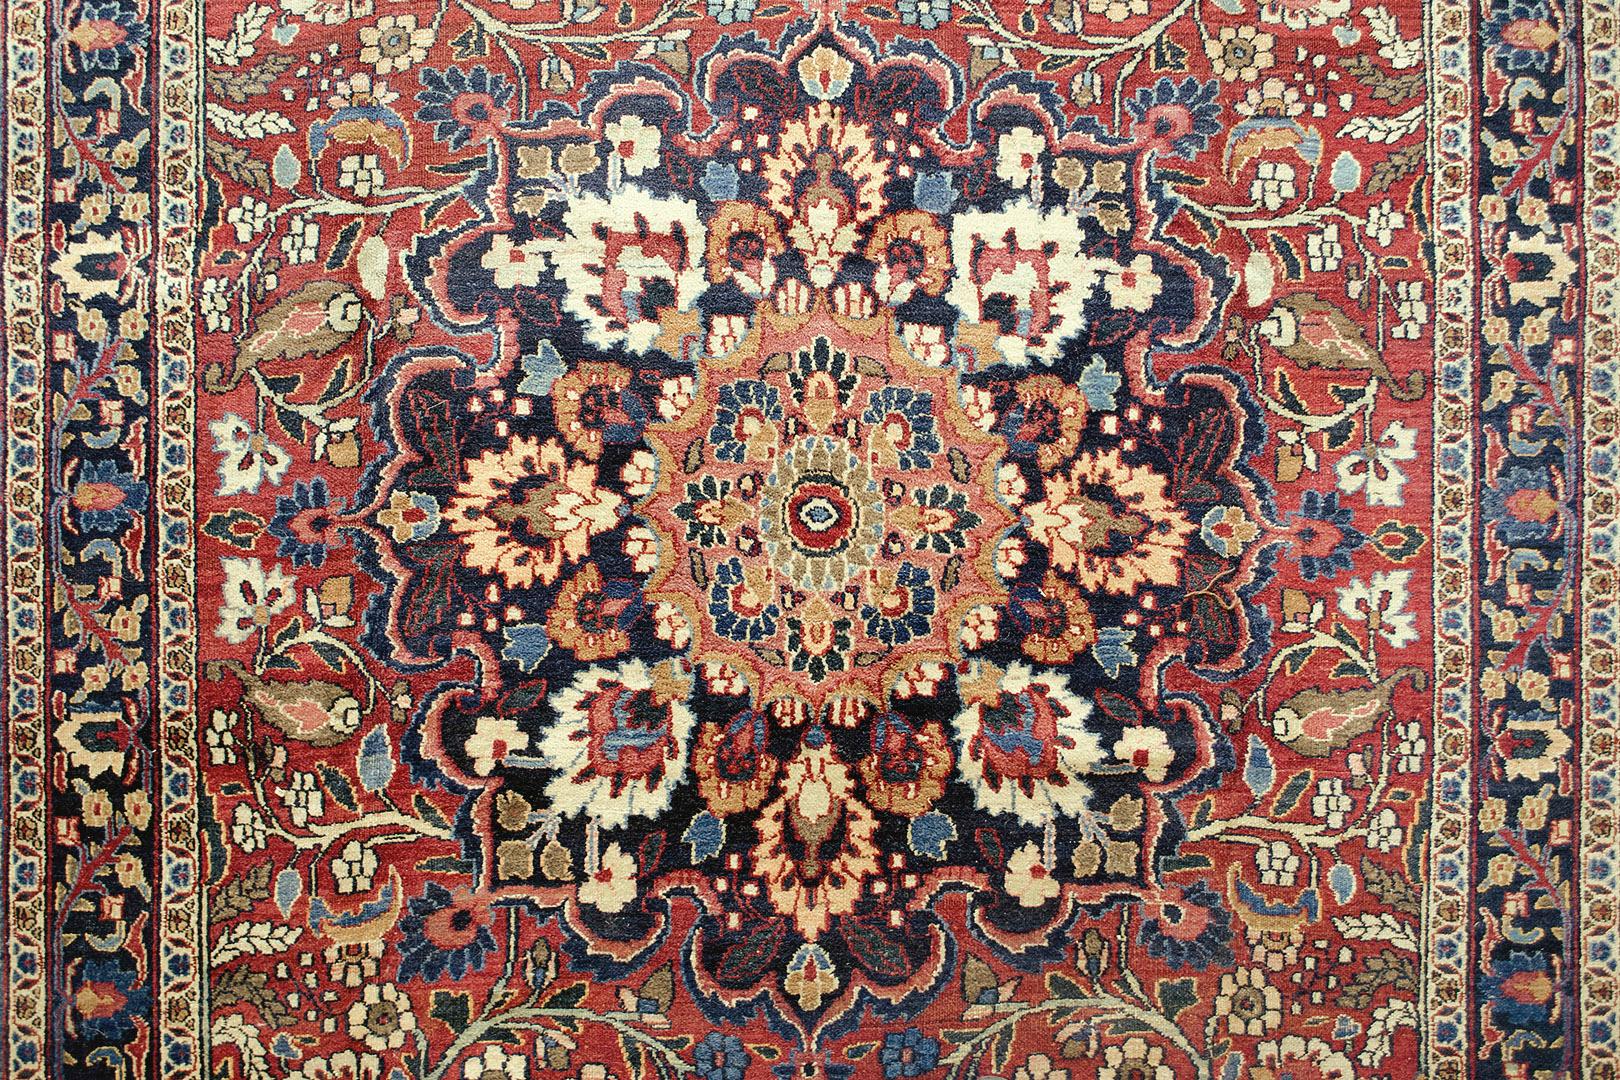 This traditional handwoven Persian Khorassan rug has a vibrant ruby field of dense scrolling floral vines enclosing a majestic polychrome arabesque medallion, with sapphire palmette spandrels, in a sapphire dense palmette border, between a profusion